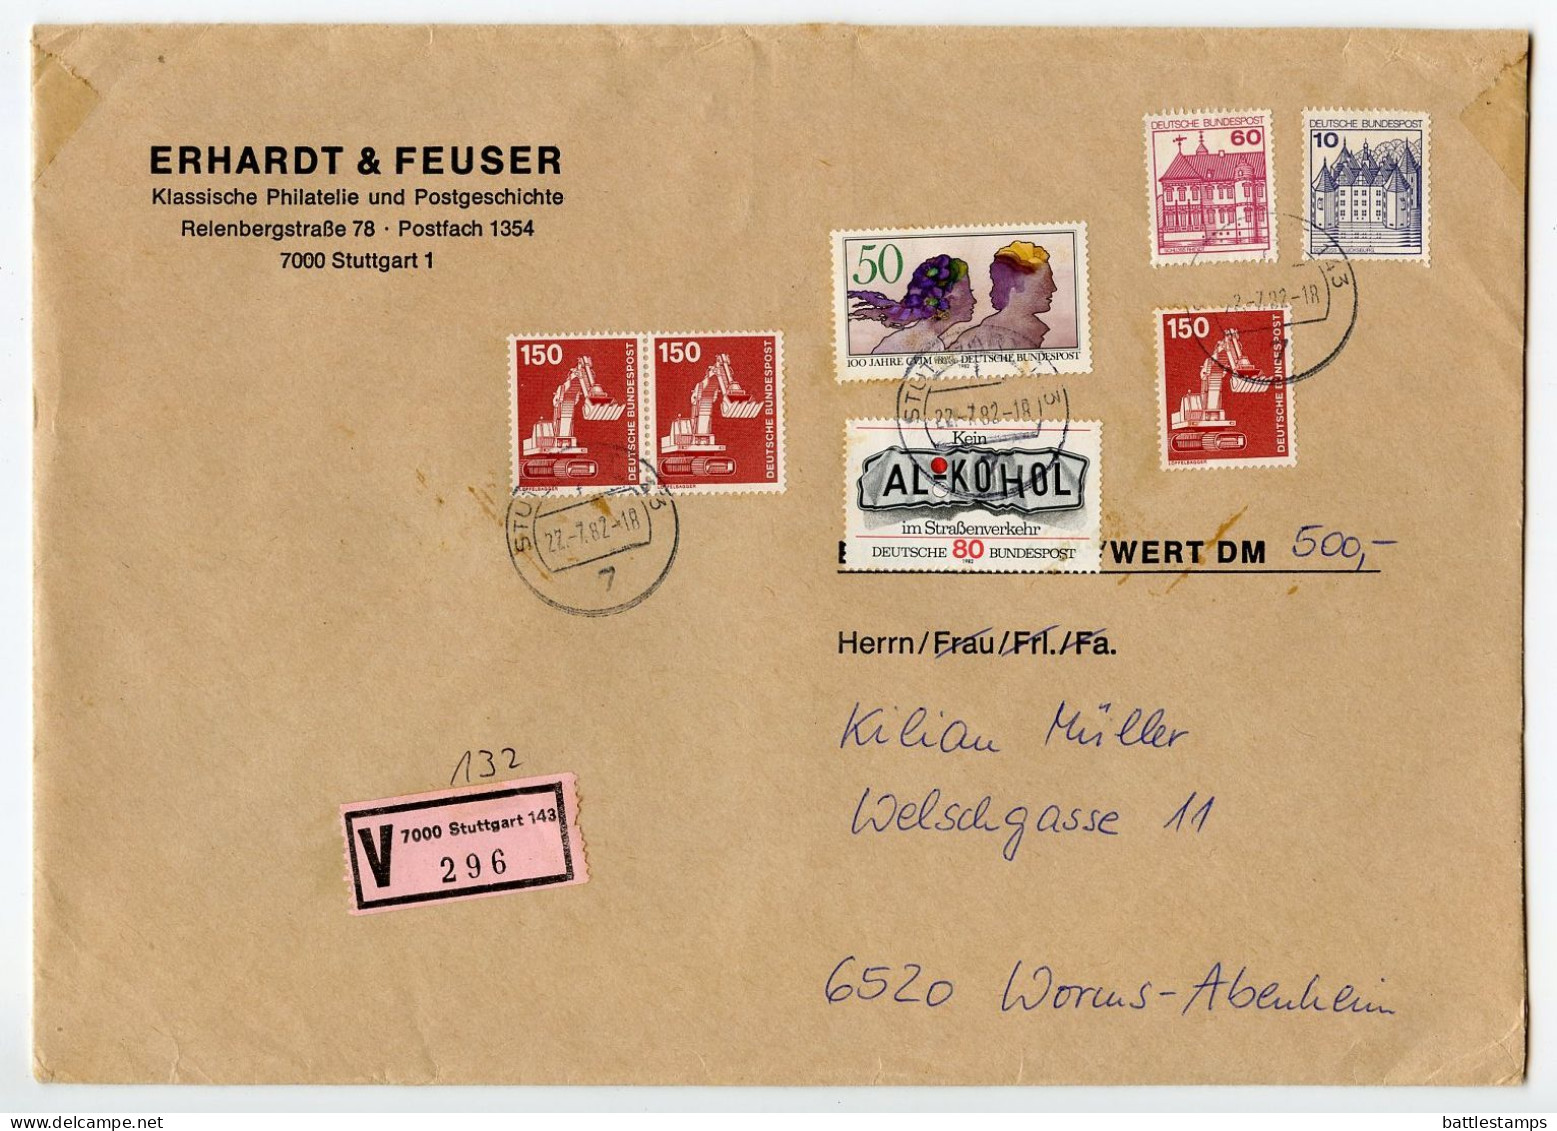 Germany, West 1982 Insured V-Label Cover; Stuttgart To Worms-Abenheim; Mix Of Stamps - Storia Postale